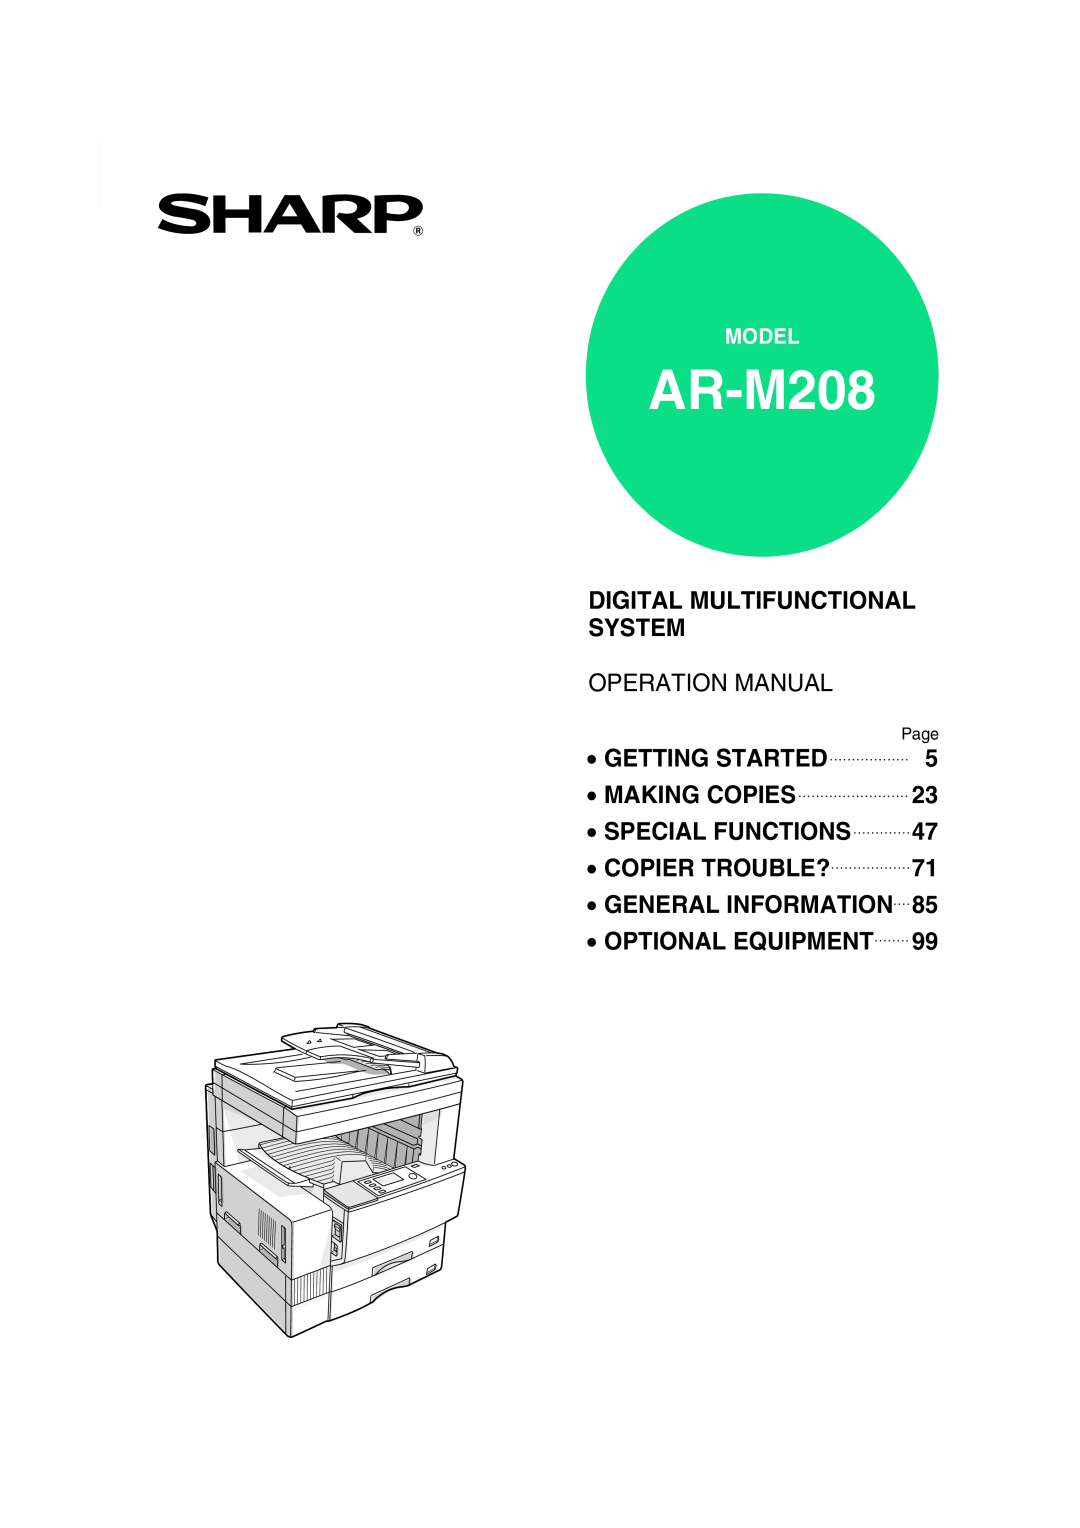 Sharp AR-M208 operation manual Digital Multifunctional System, Operation Manual, Getting Started, Making Copies, Model 